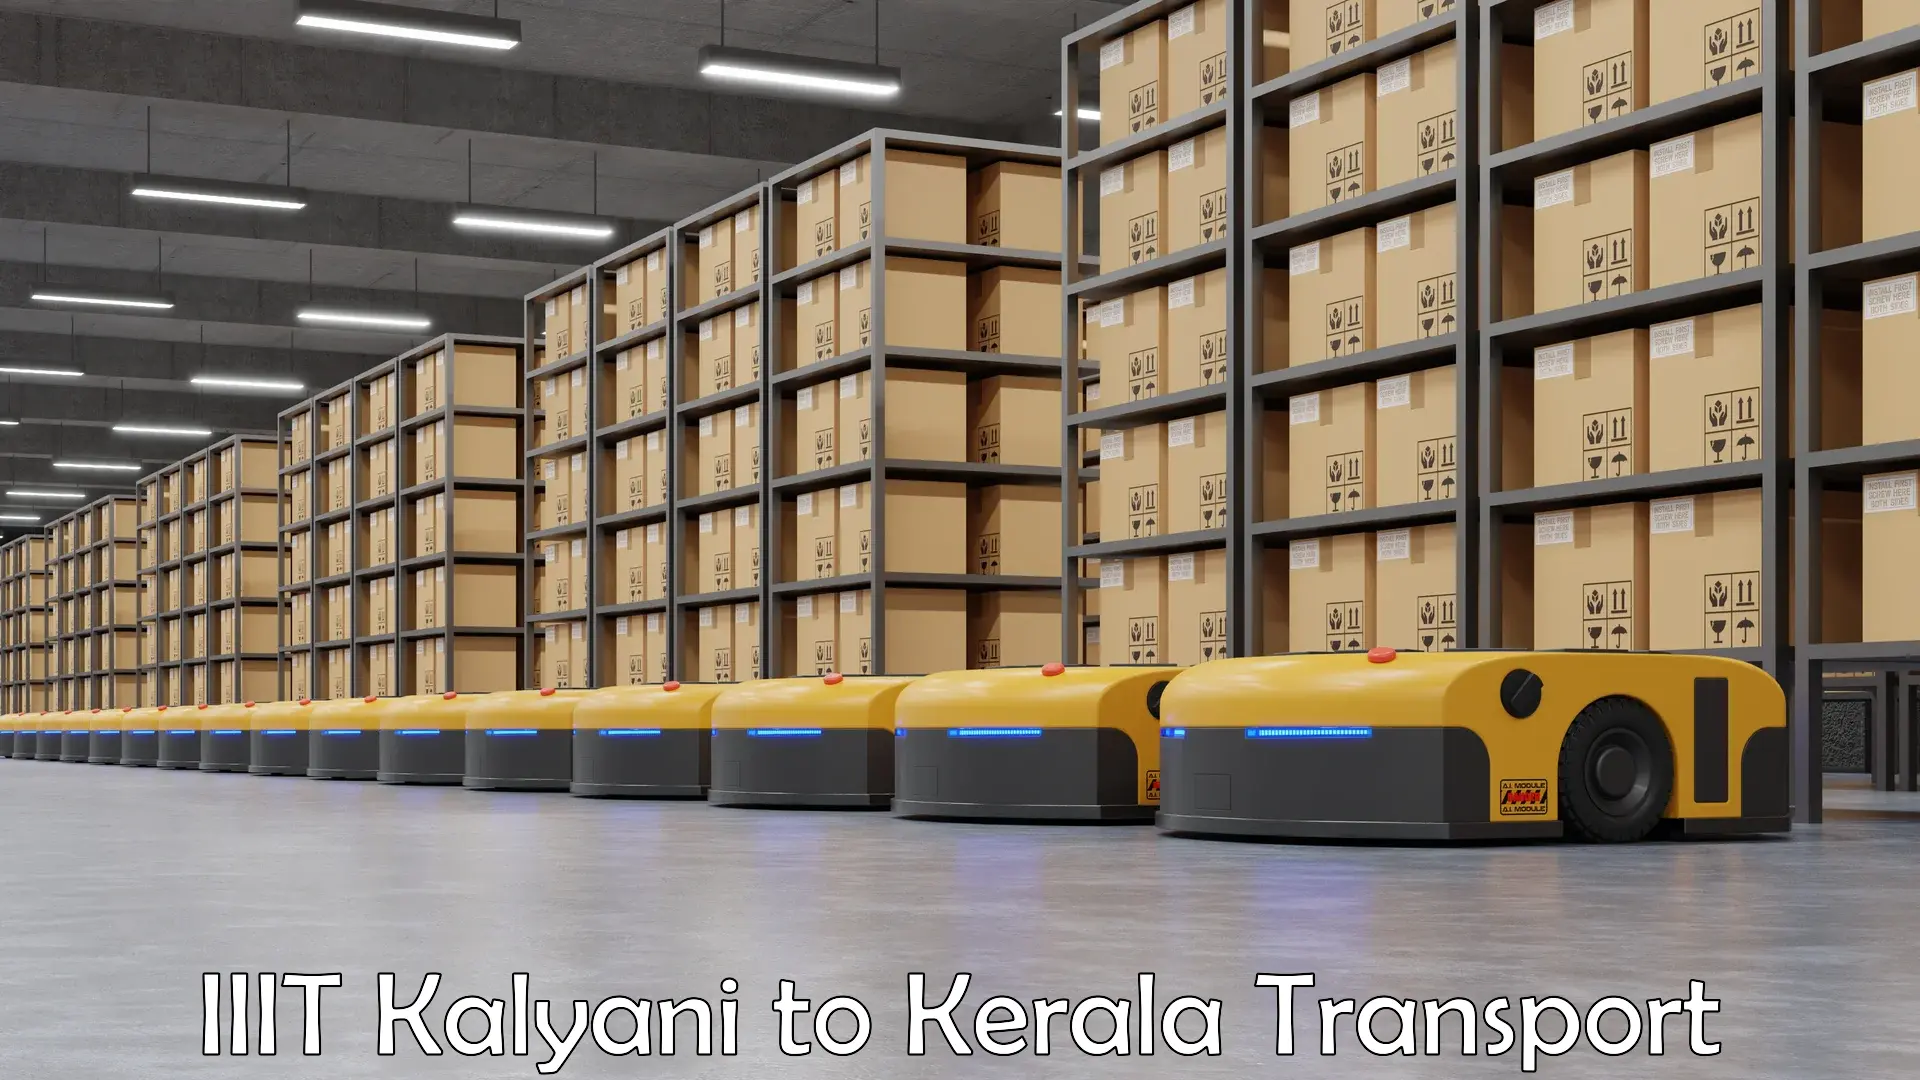 Goods delivery service IIIT Kalyani to Cochin University of Science and Technology